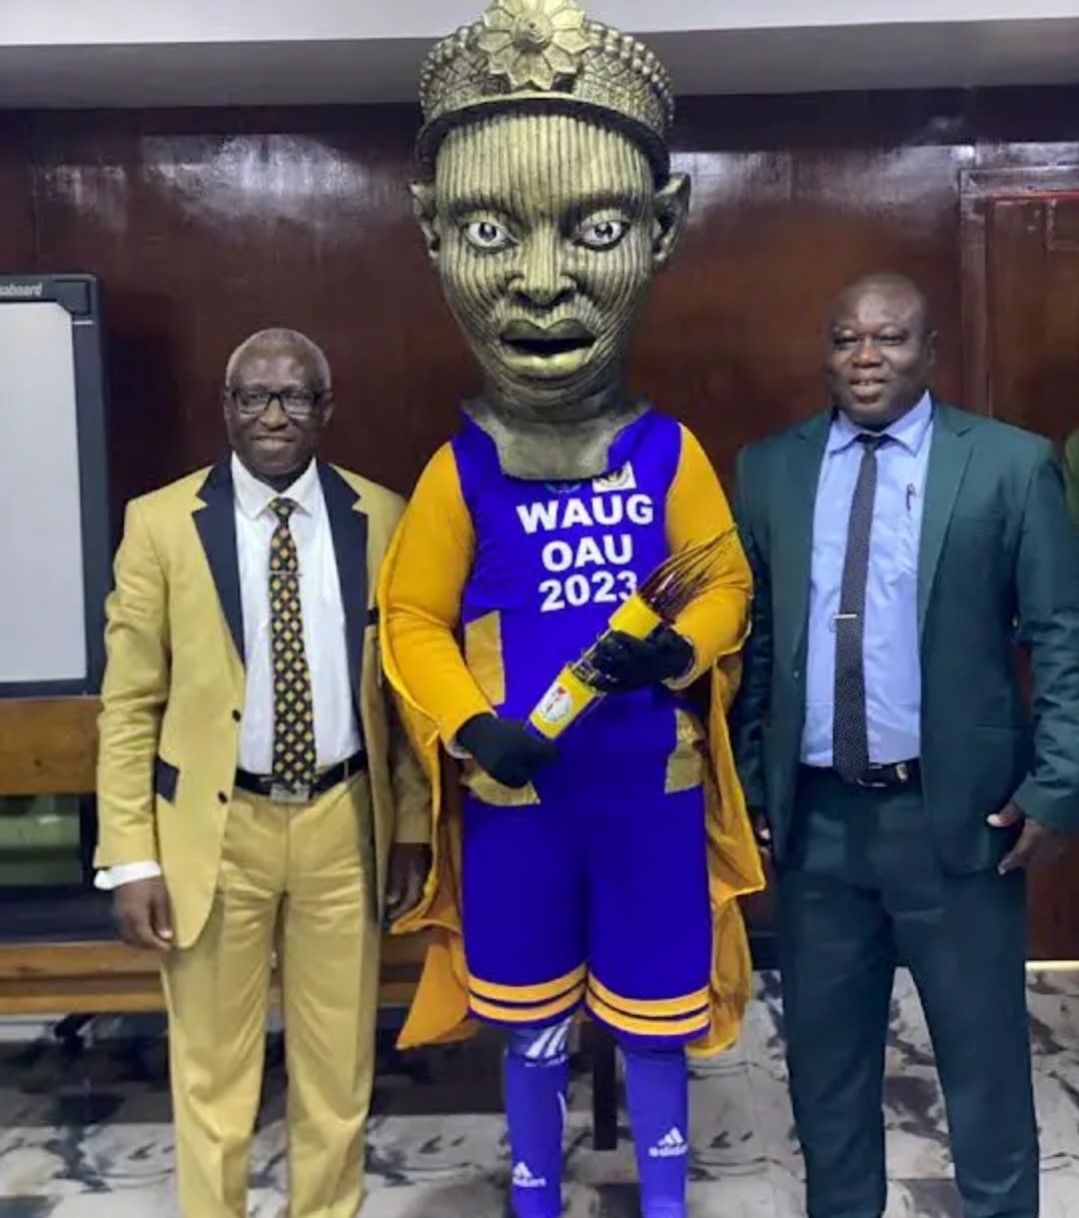 University for Development Studies Sports Director Joins Obafemi Awolowo University to Unveil Mascot for 2023 West African Universities Games (WAUG)